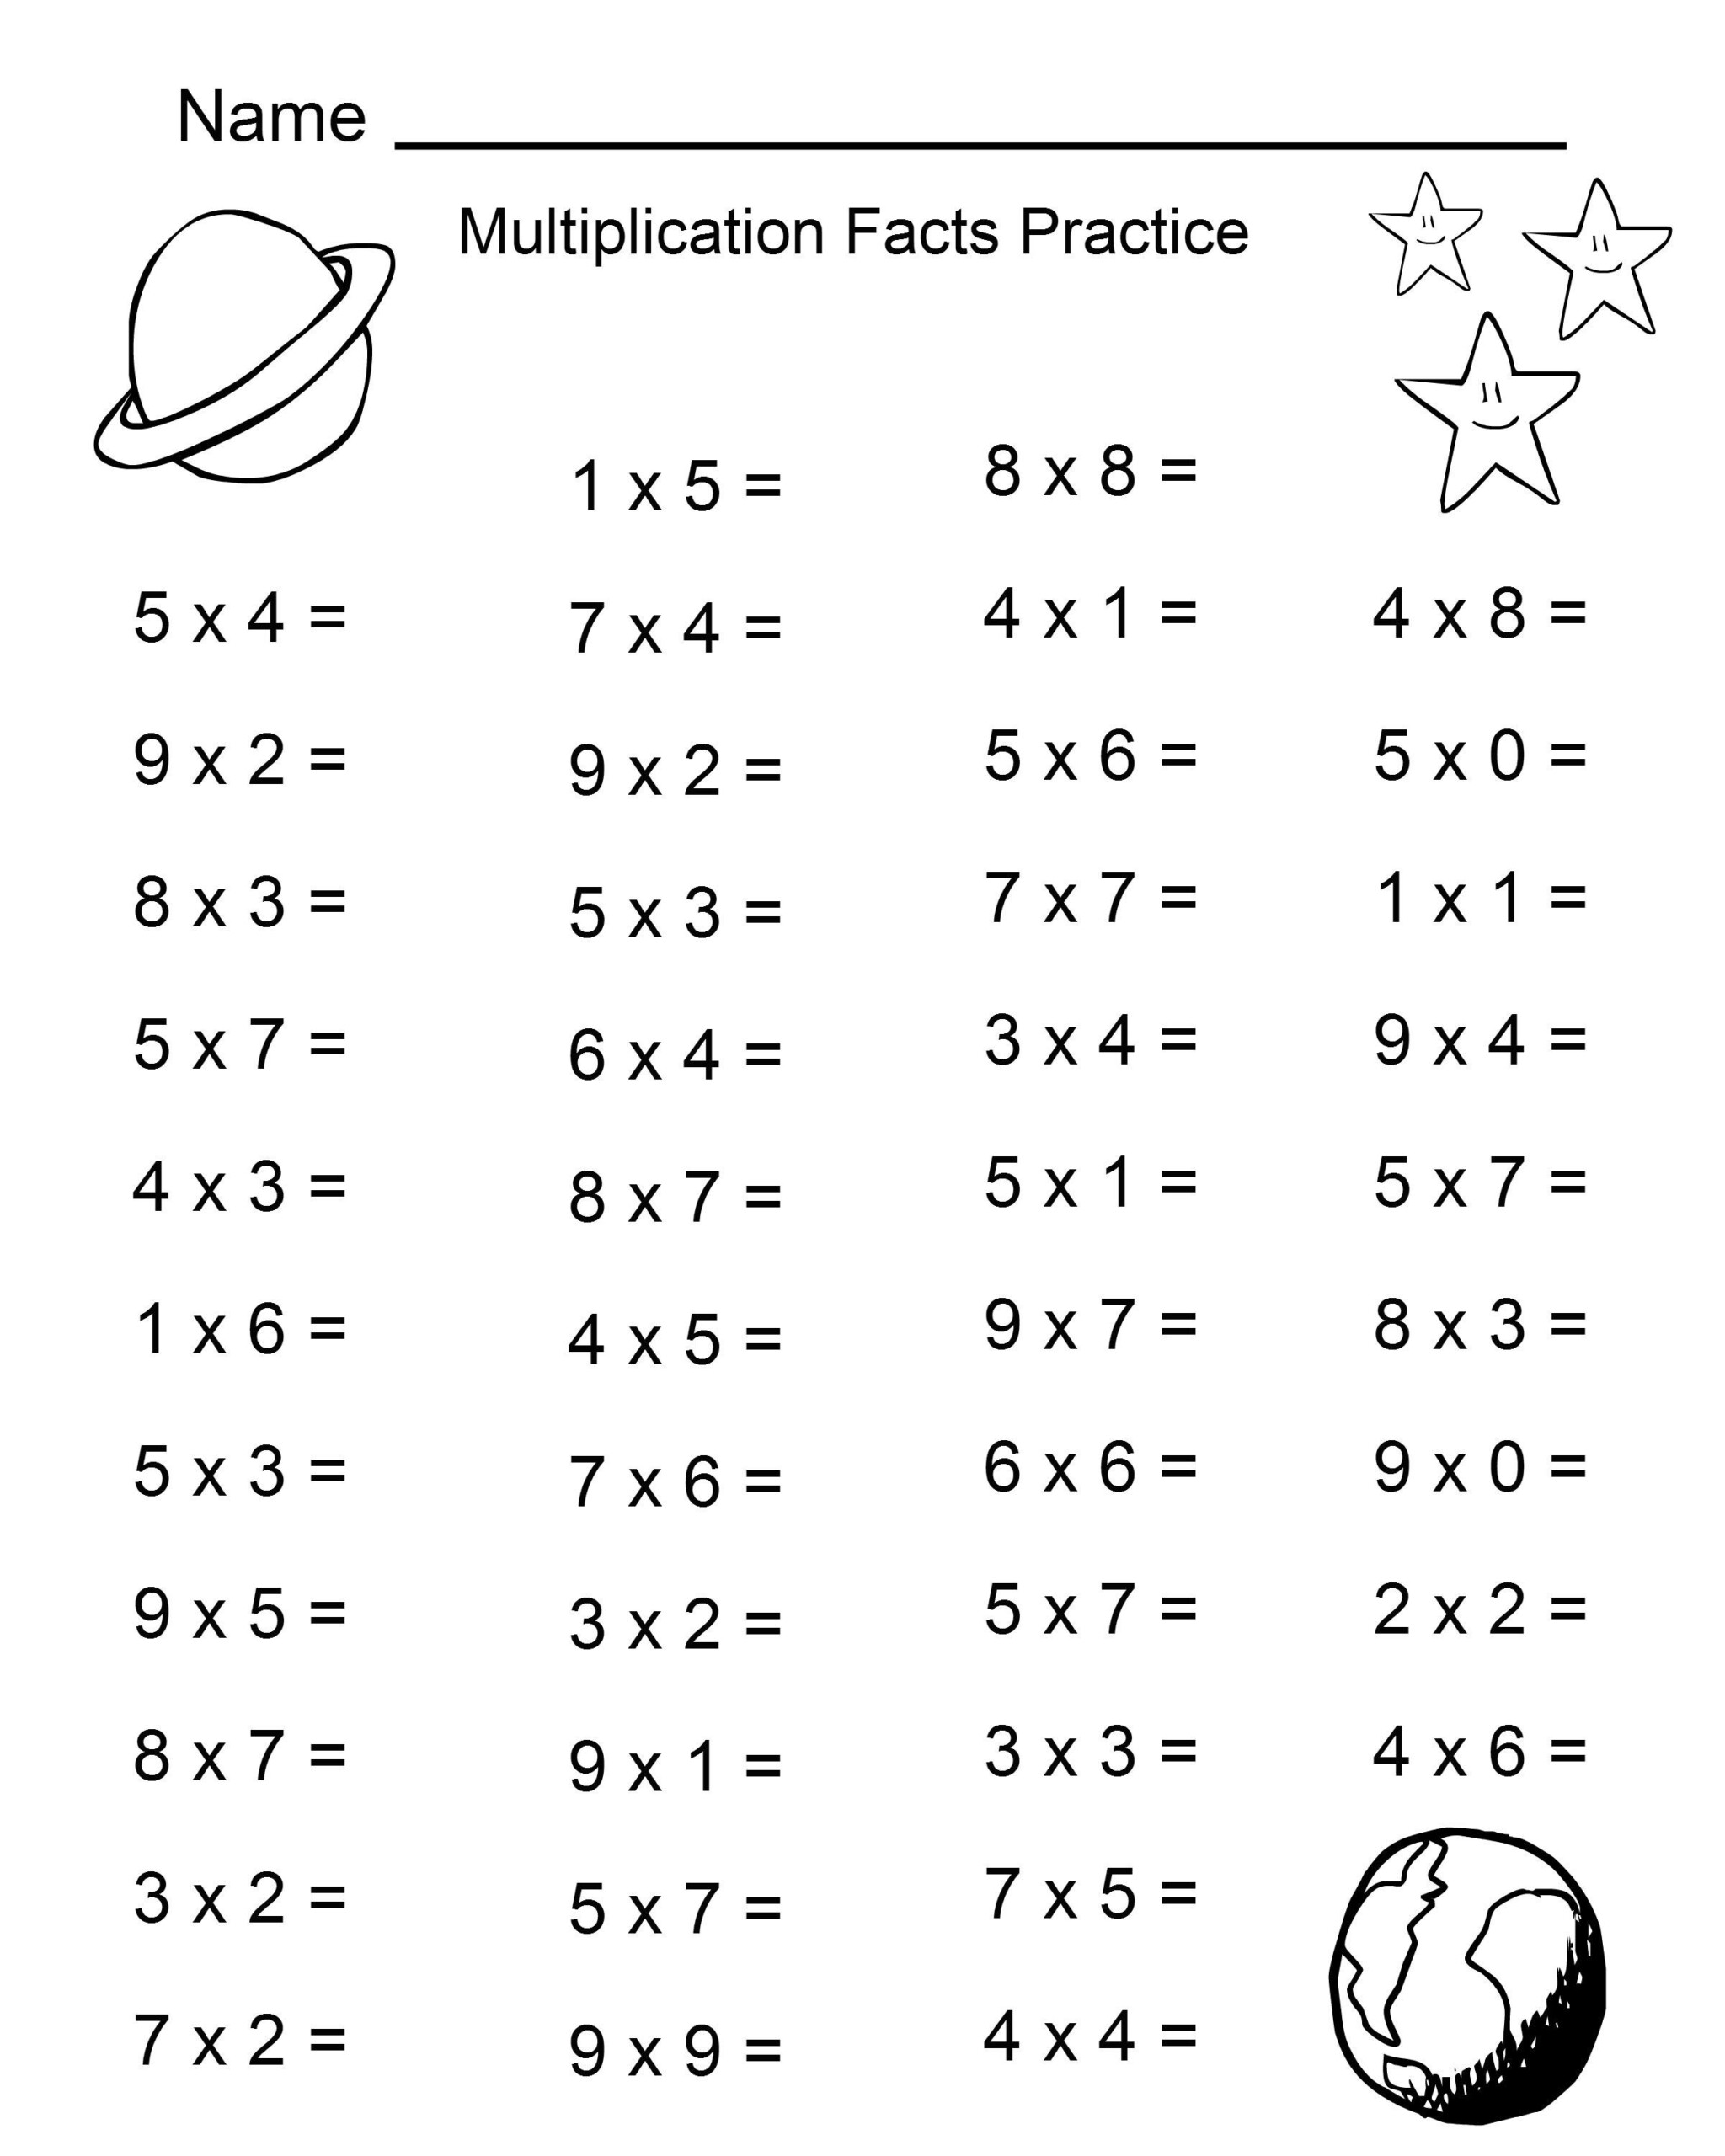 Single Multiplication Worksheets For Students | Educative throughout Printable Multiplication Quiz